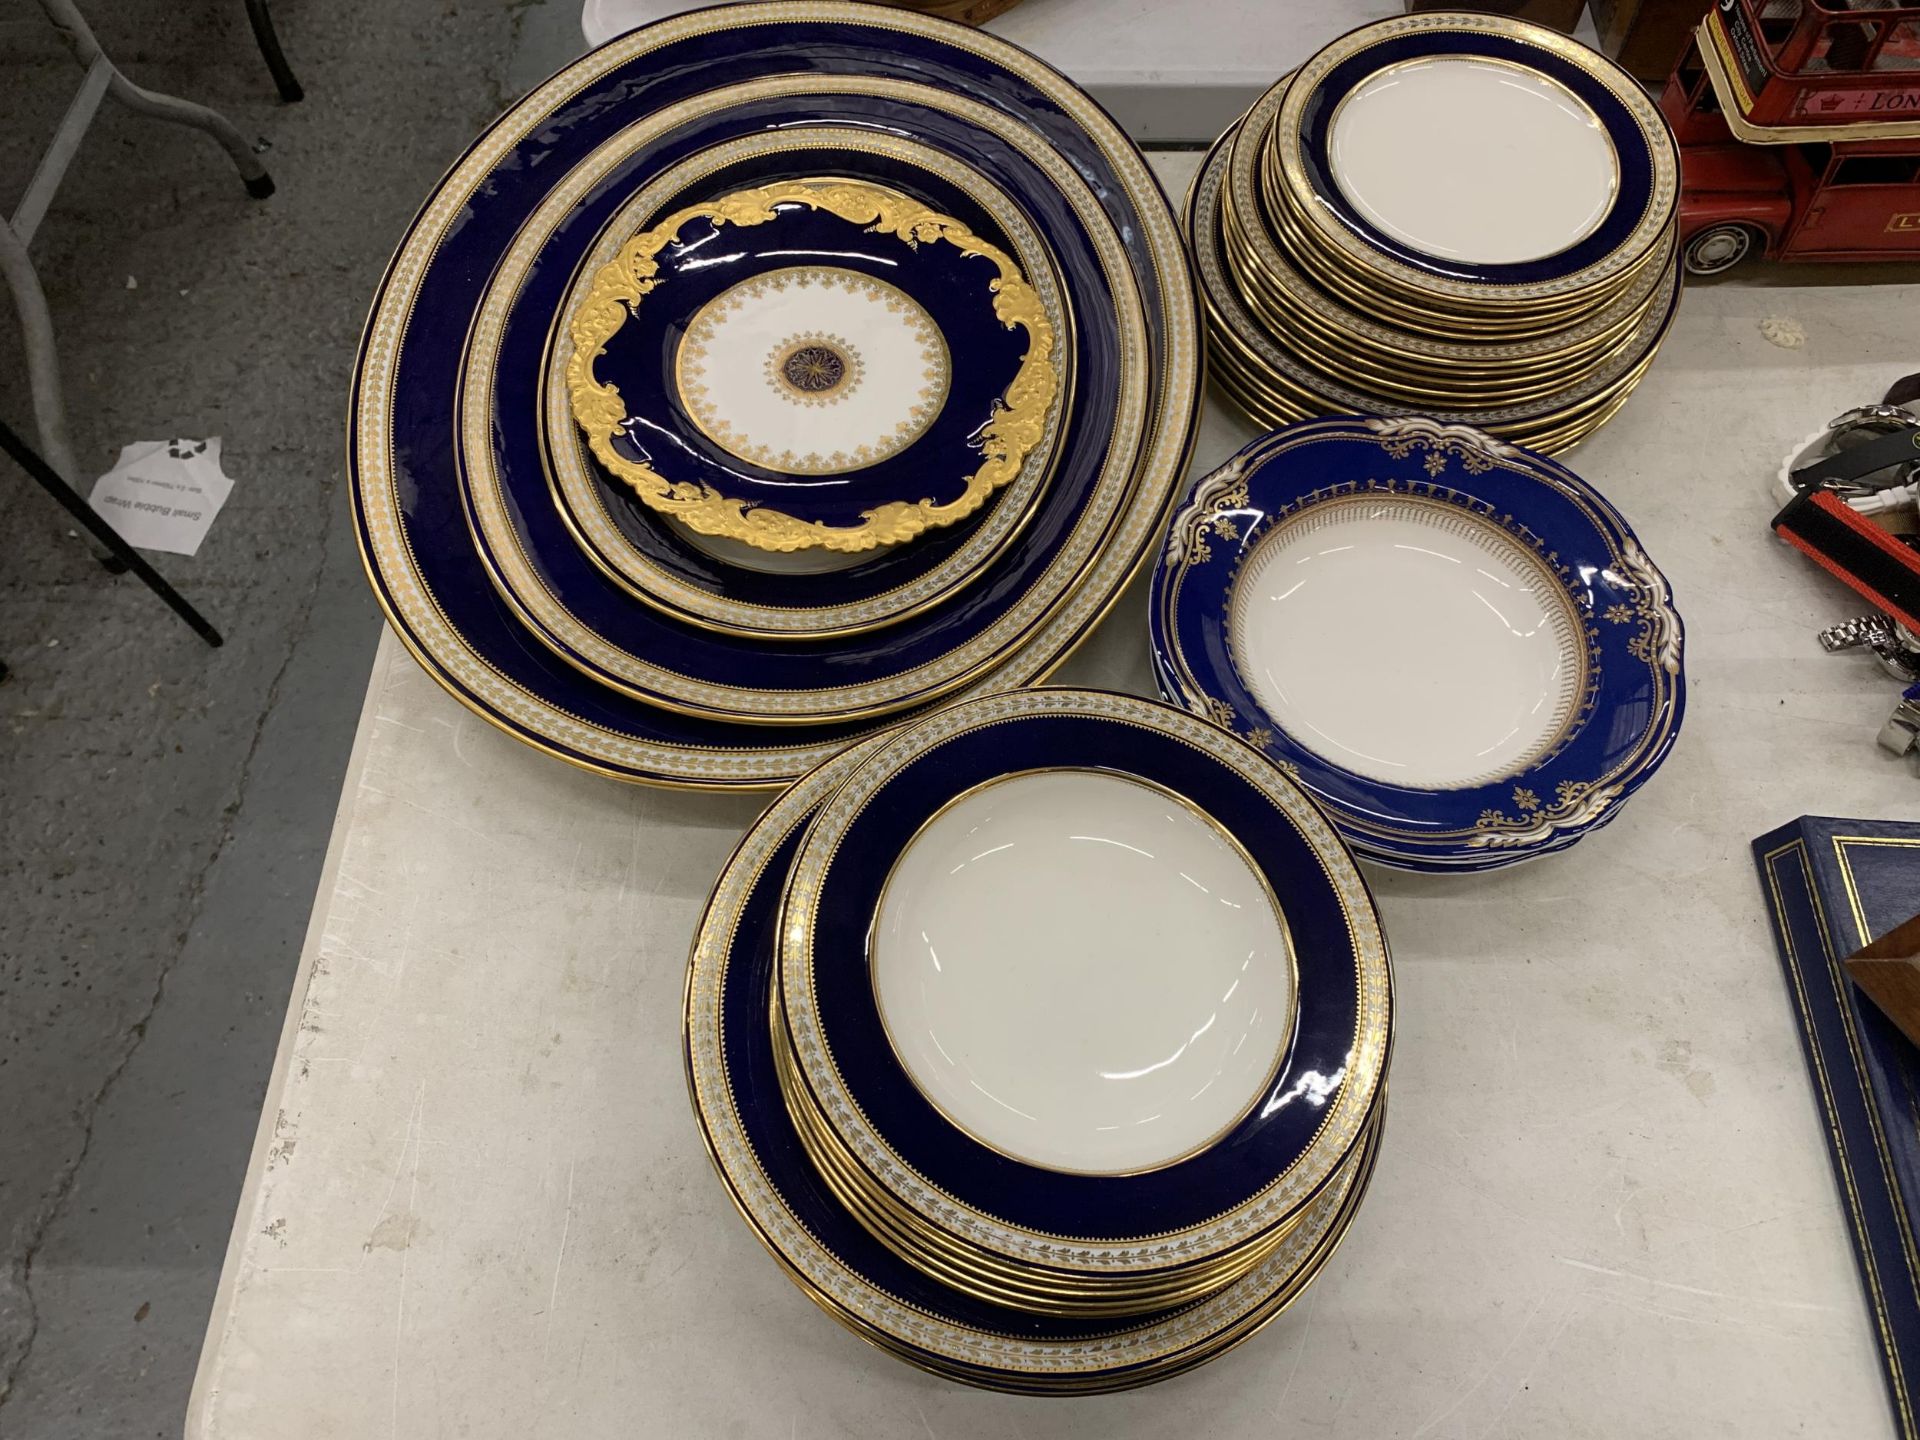 A QUANTITY OF SPODE TO INCLUDE SERVING PLATTERS, BOWLS, PLATES, ETC, IN COBALT BLUE WITH GILT